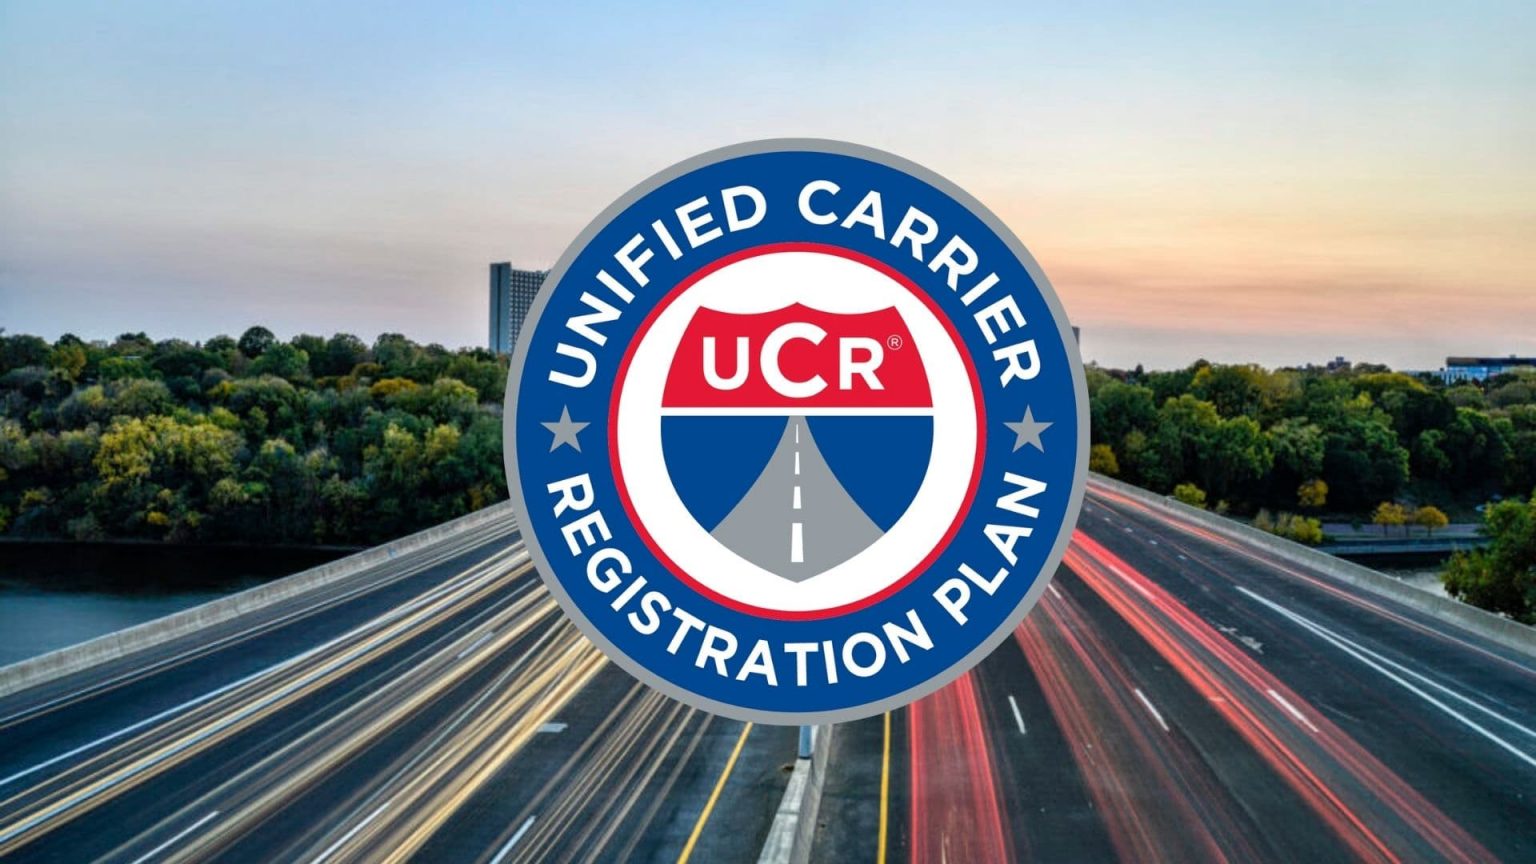 Unified Carrier Registration 2024